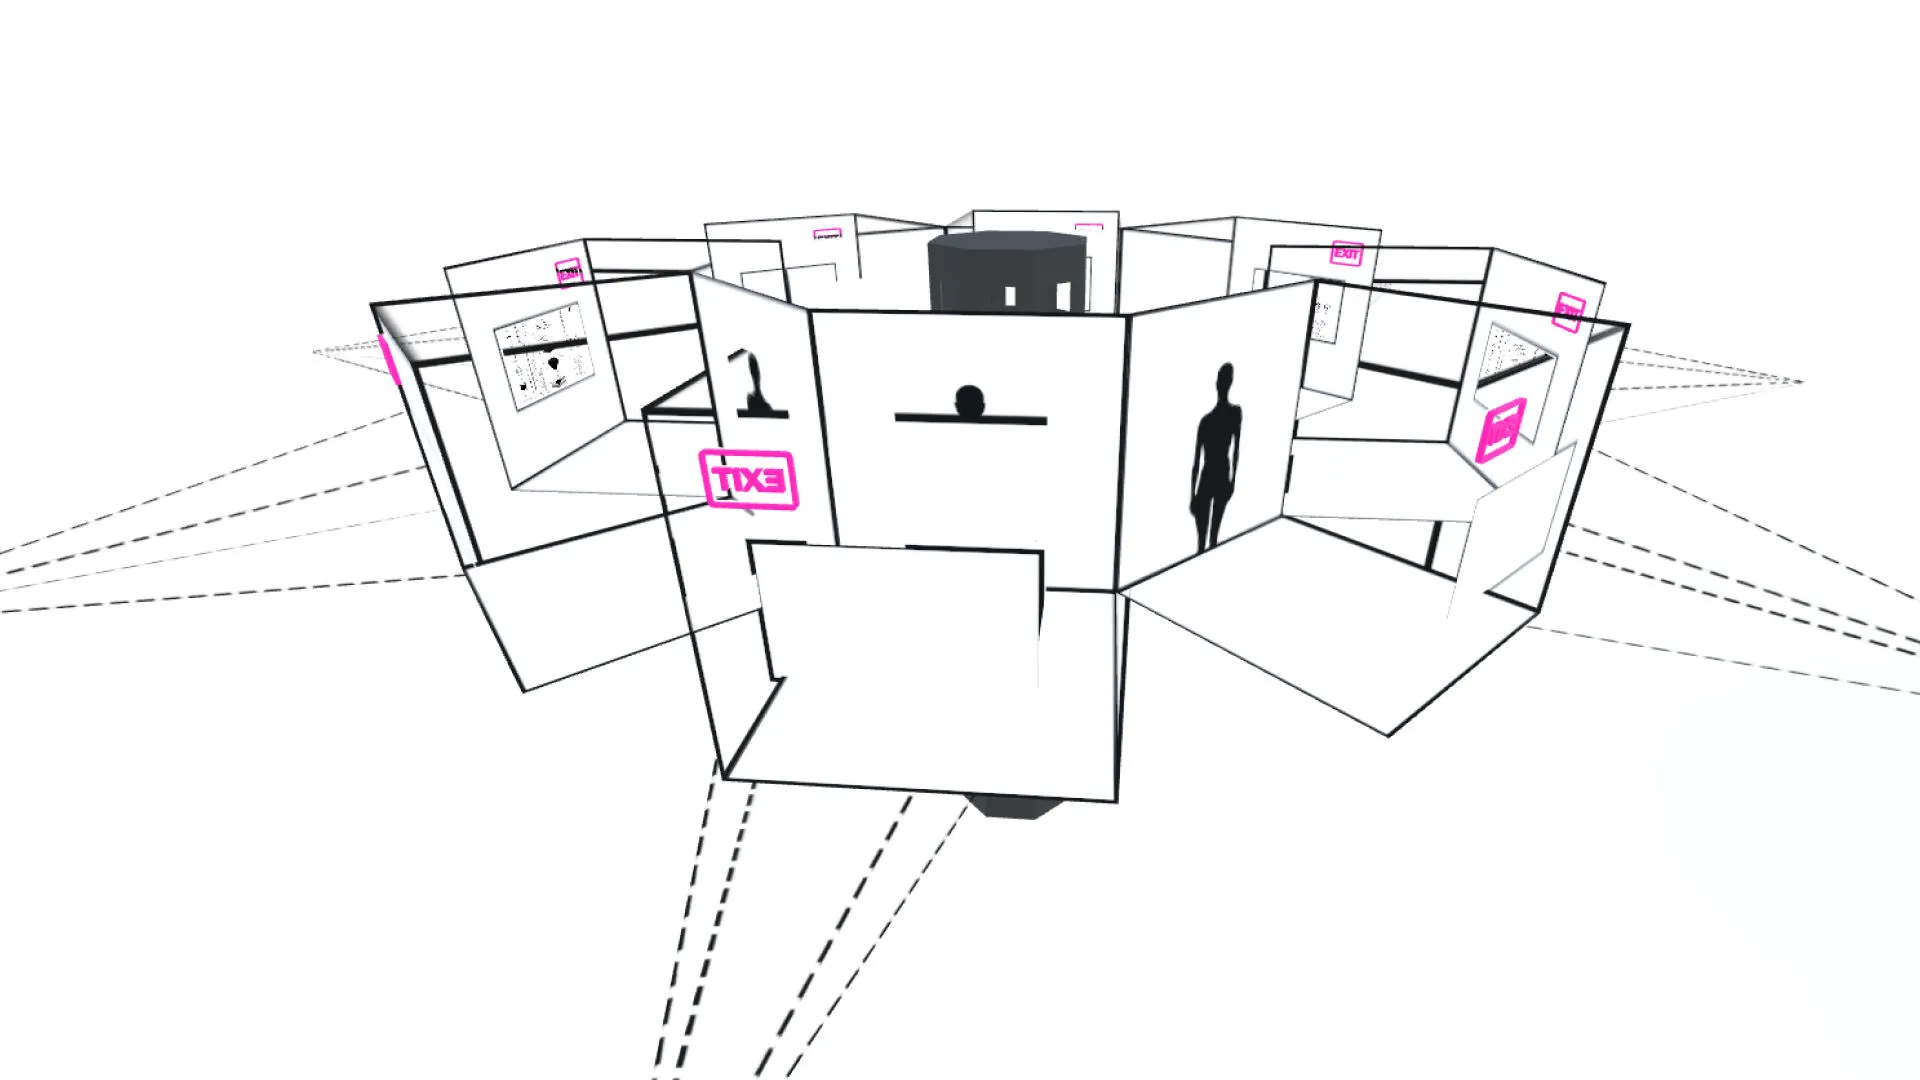 A still image of the New Extractivism XR metaverse scene that shows different cubicles with videos where people can enter